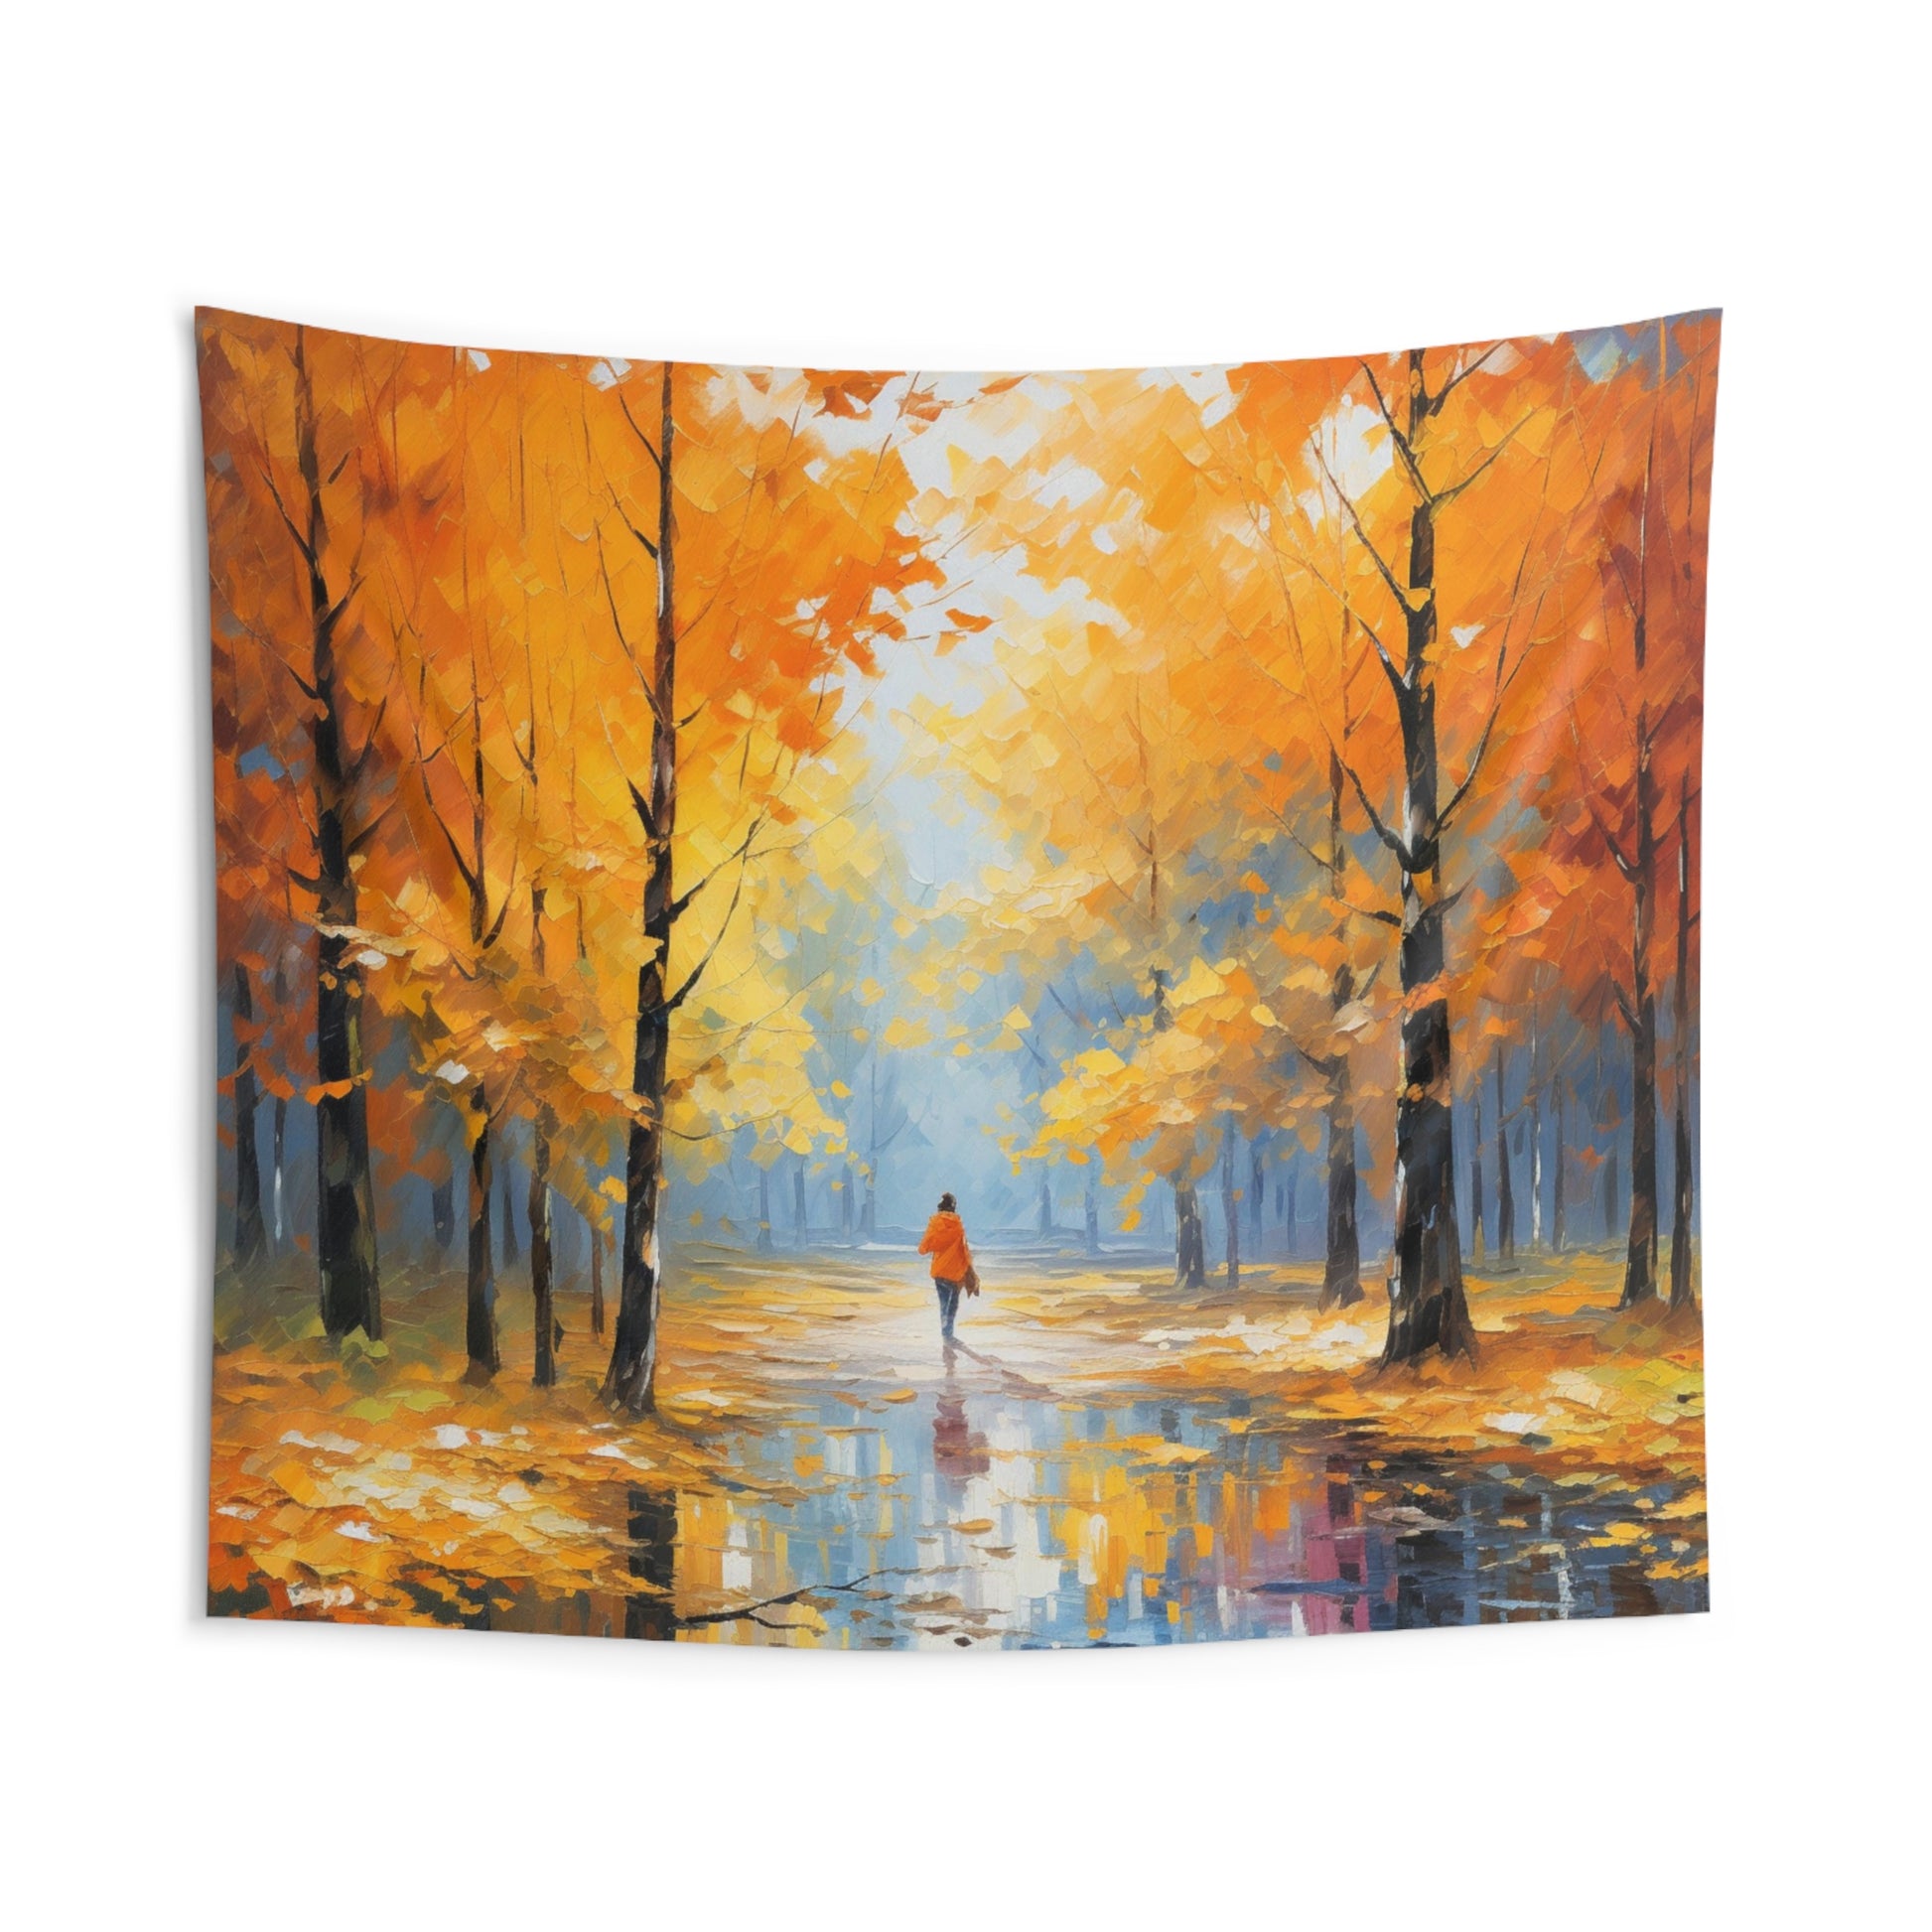 Fall Autumn Leaves Tapestry, Forest Nature Wall Art Hanging Cool Unique Landscape Aesthetic Large Small Bedroom College Dorm Room Starcove Fashion